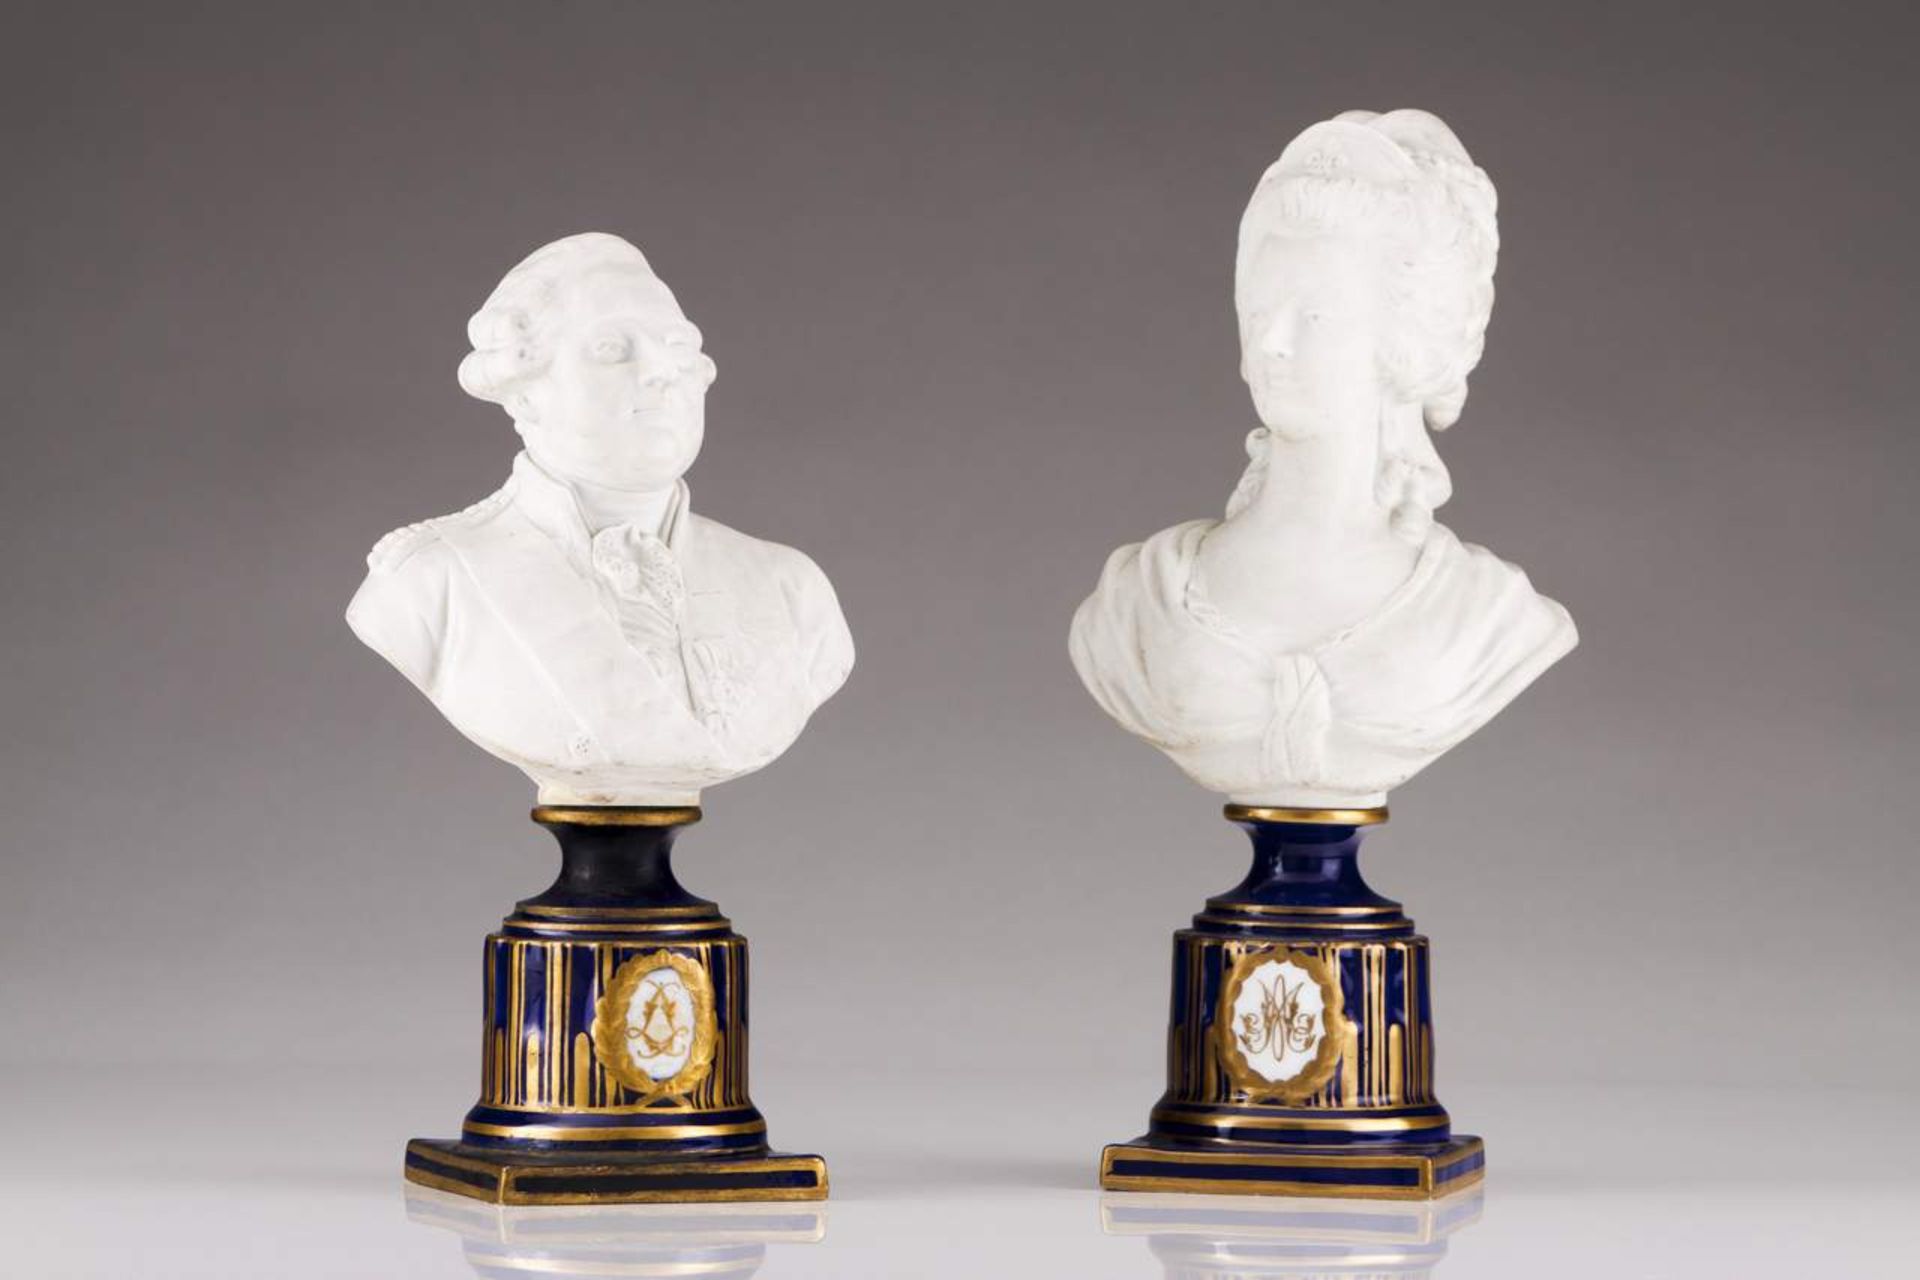 Marie Antoinette and Louis XVI
A pair of bicuit porcelain sculptures
Polychrome bases (one restored)